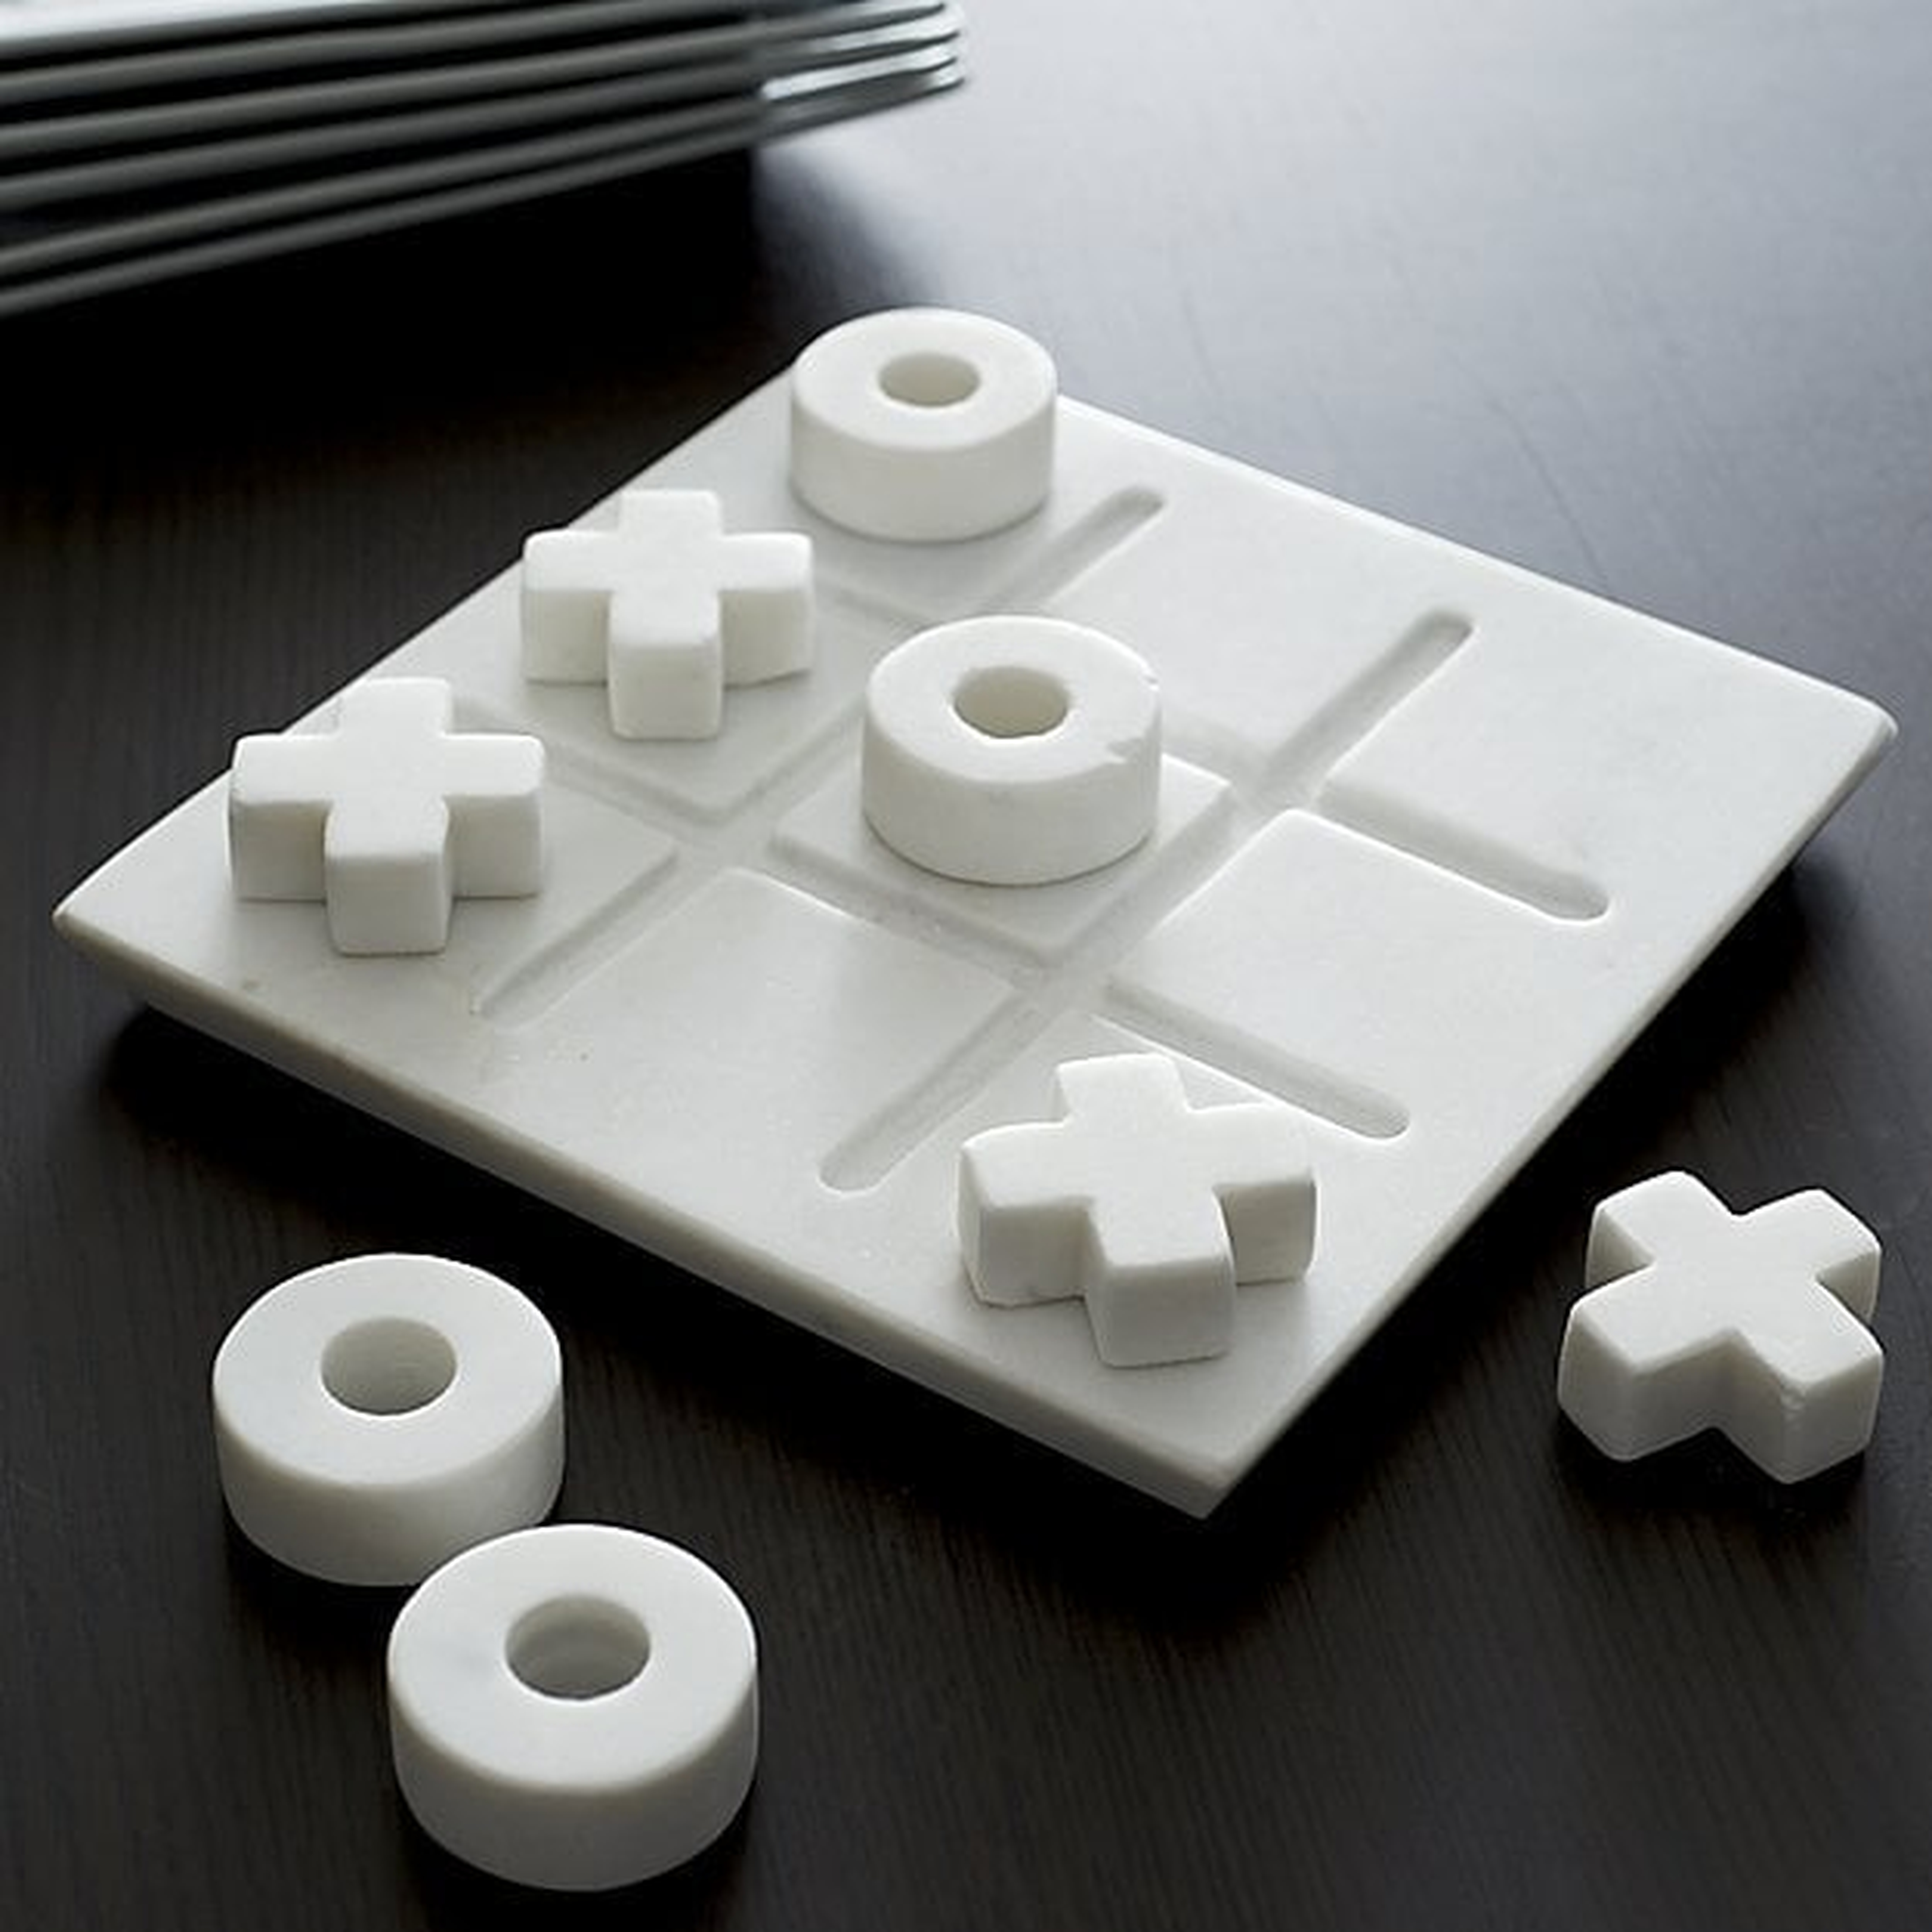 Marble Tic-Tac-Toe Game Set - Crate and Barrel